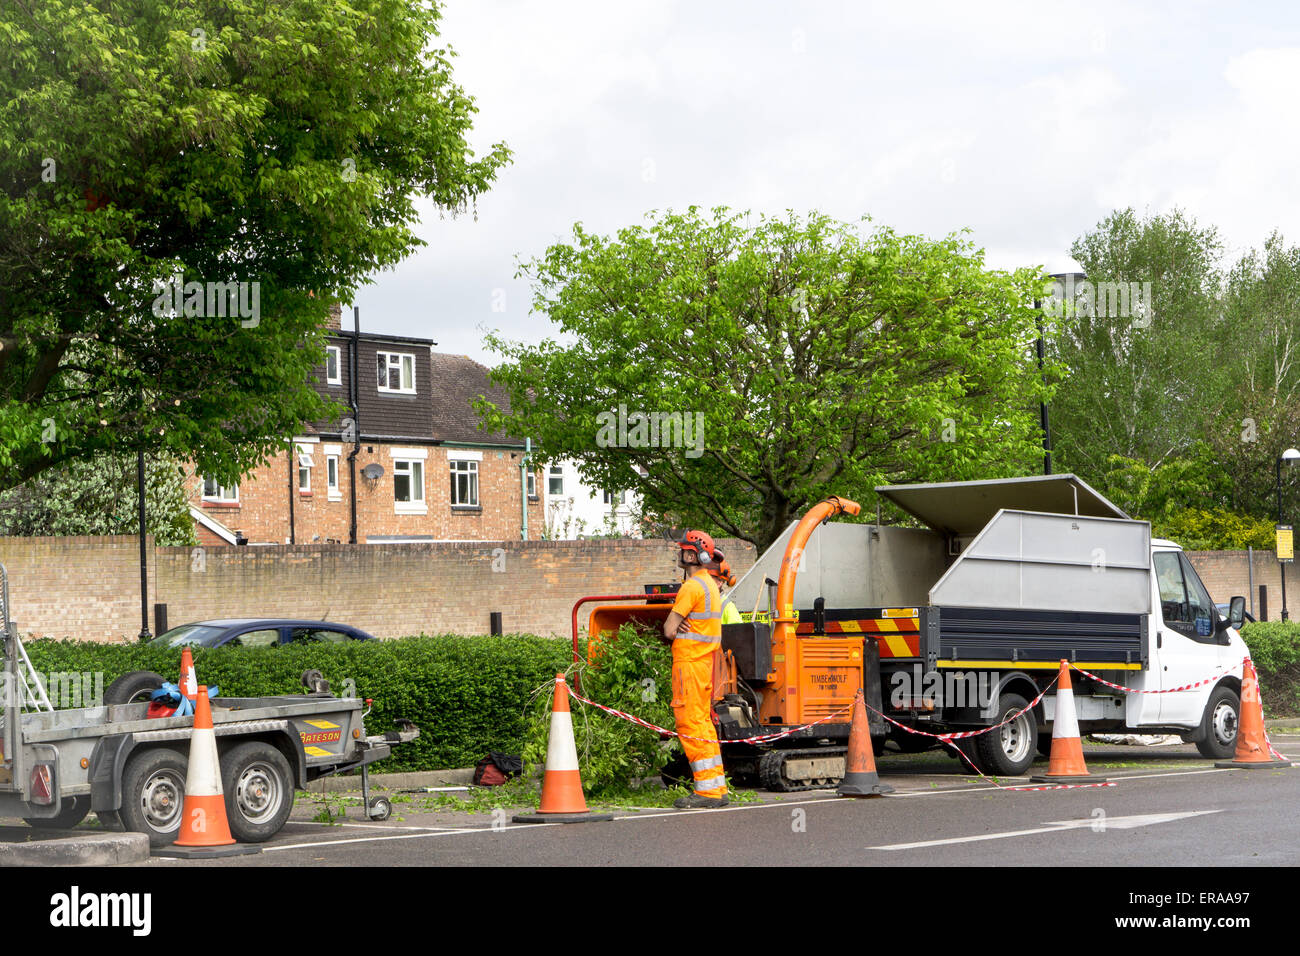 CAMBRIDGE, ENGLAND - 7 May 2015: Tree Surgeons at work in public car park in Cambridge, England Stock Photo